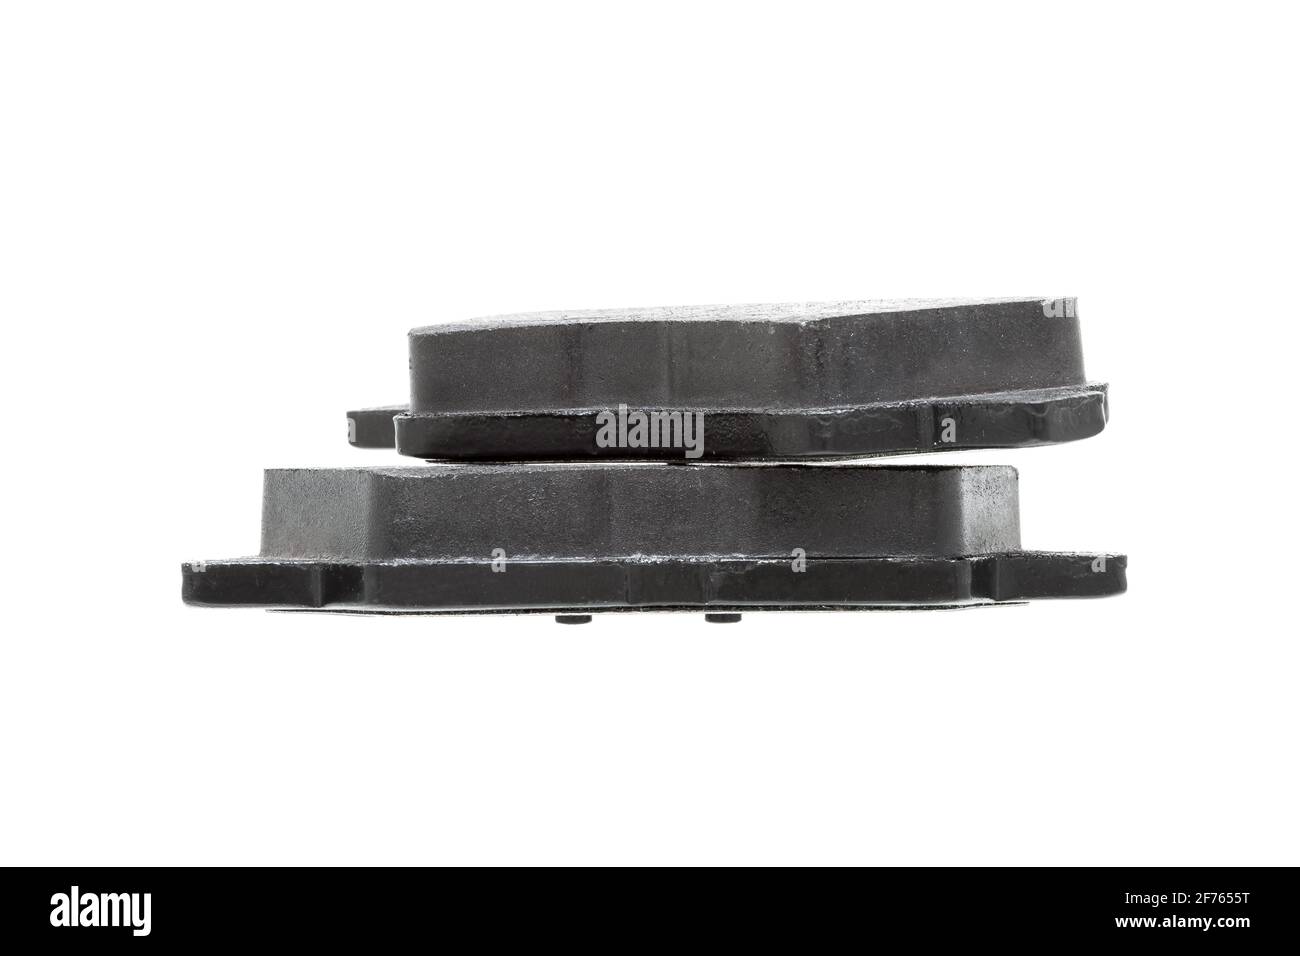 brake pads one on top of the other demonstrate the thickness of asbestos abrasive alloy, new car spare parts isolated on white background side view. Stock Photo